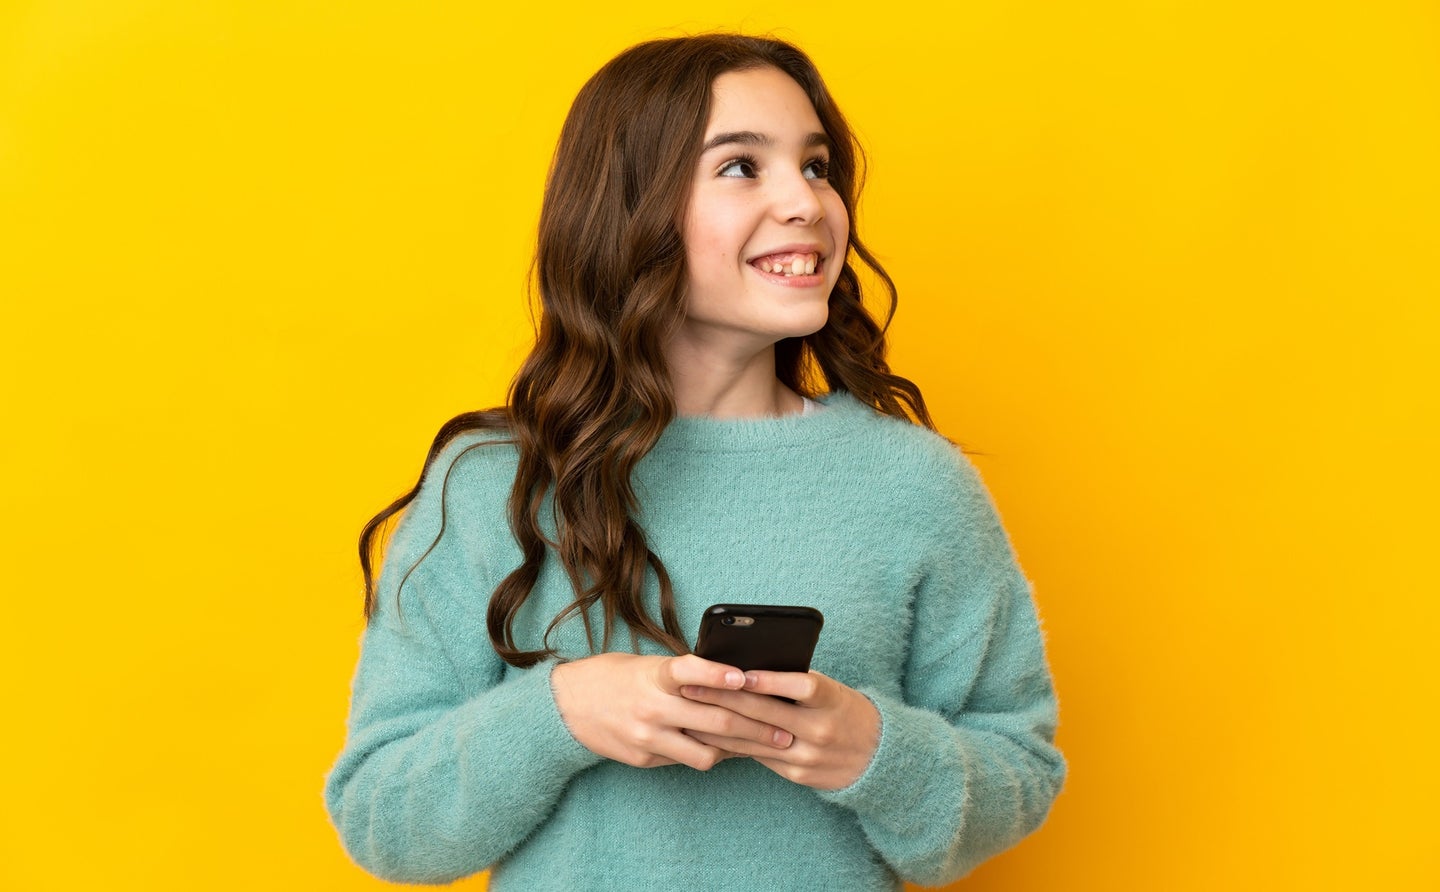 Teen in green sweatshirt with long brown hair against a bright yellow background scrolling through TikTok on a smartphone